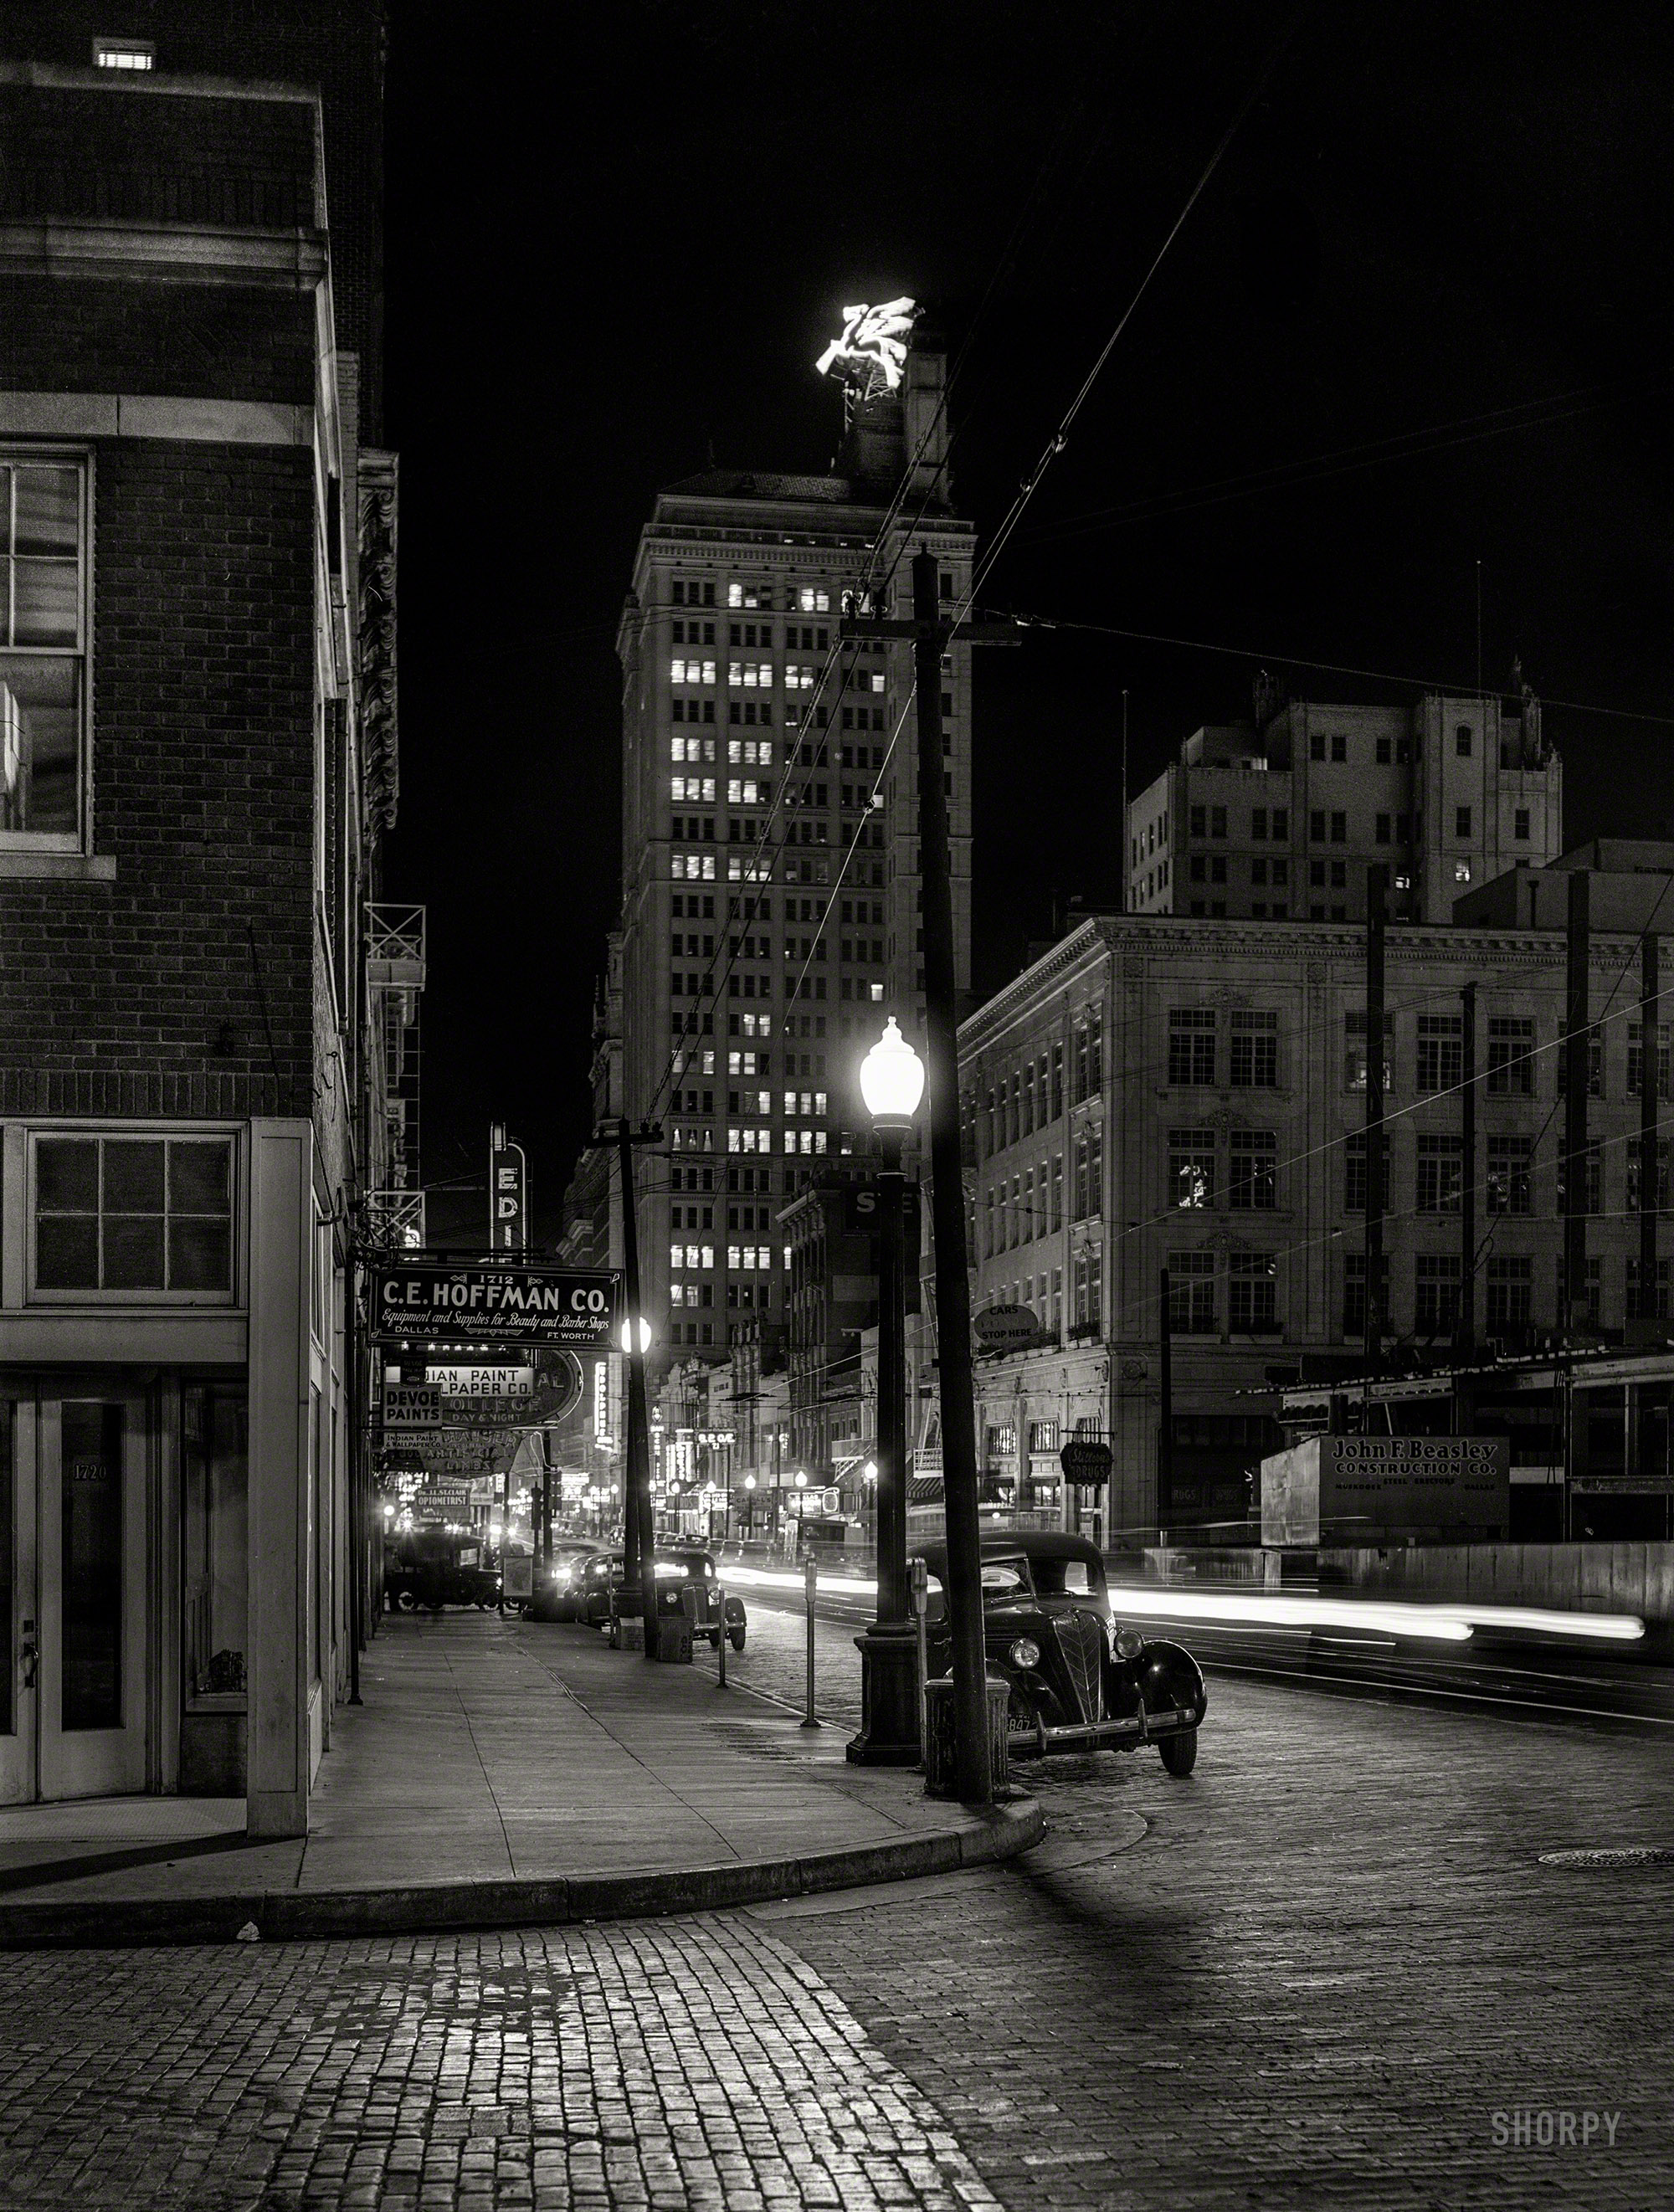 January 1942. "Night view, downtown section. Dallas, Texas." Medium format negative by Arthur Rothstein for the Office of War Information. View full size.